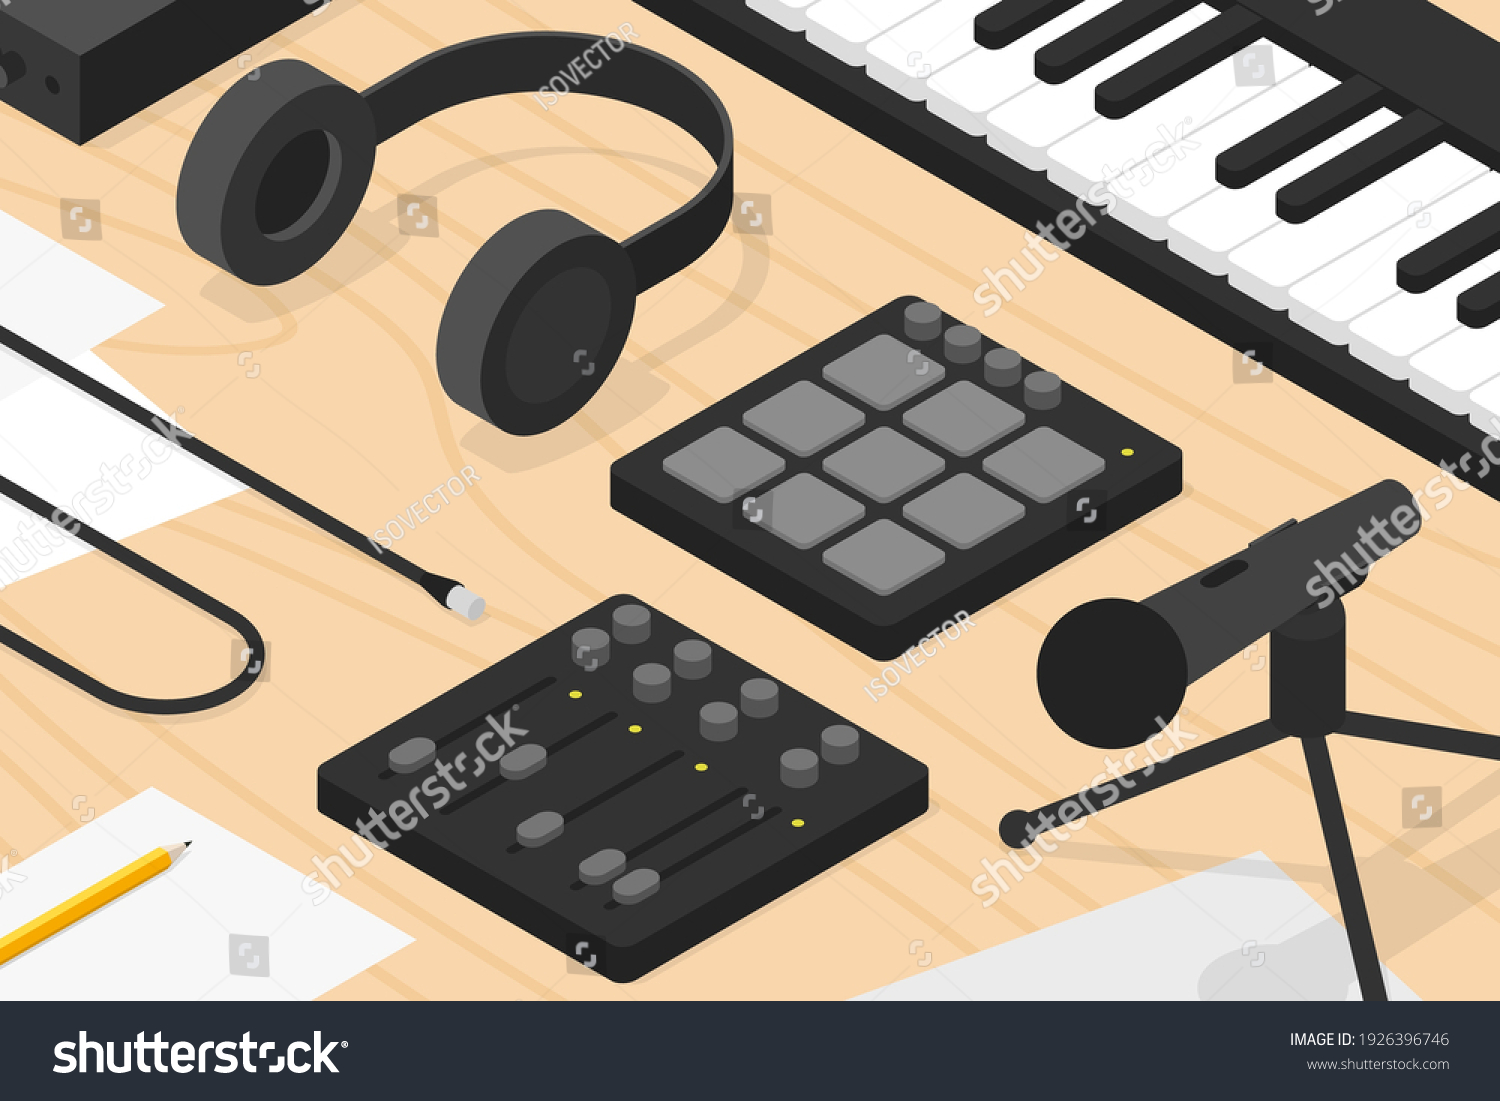 SVG of Vector isometric sound production illustration. Sound production equipment - vocal microphone with table stand, headphones, mixer, keyboard, paper, cable, pencil. svg